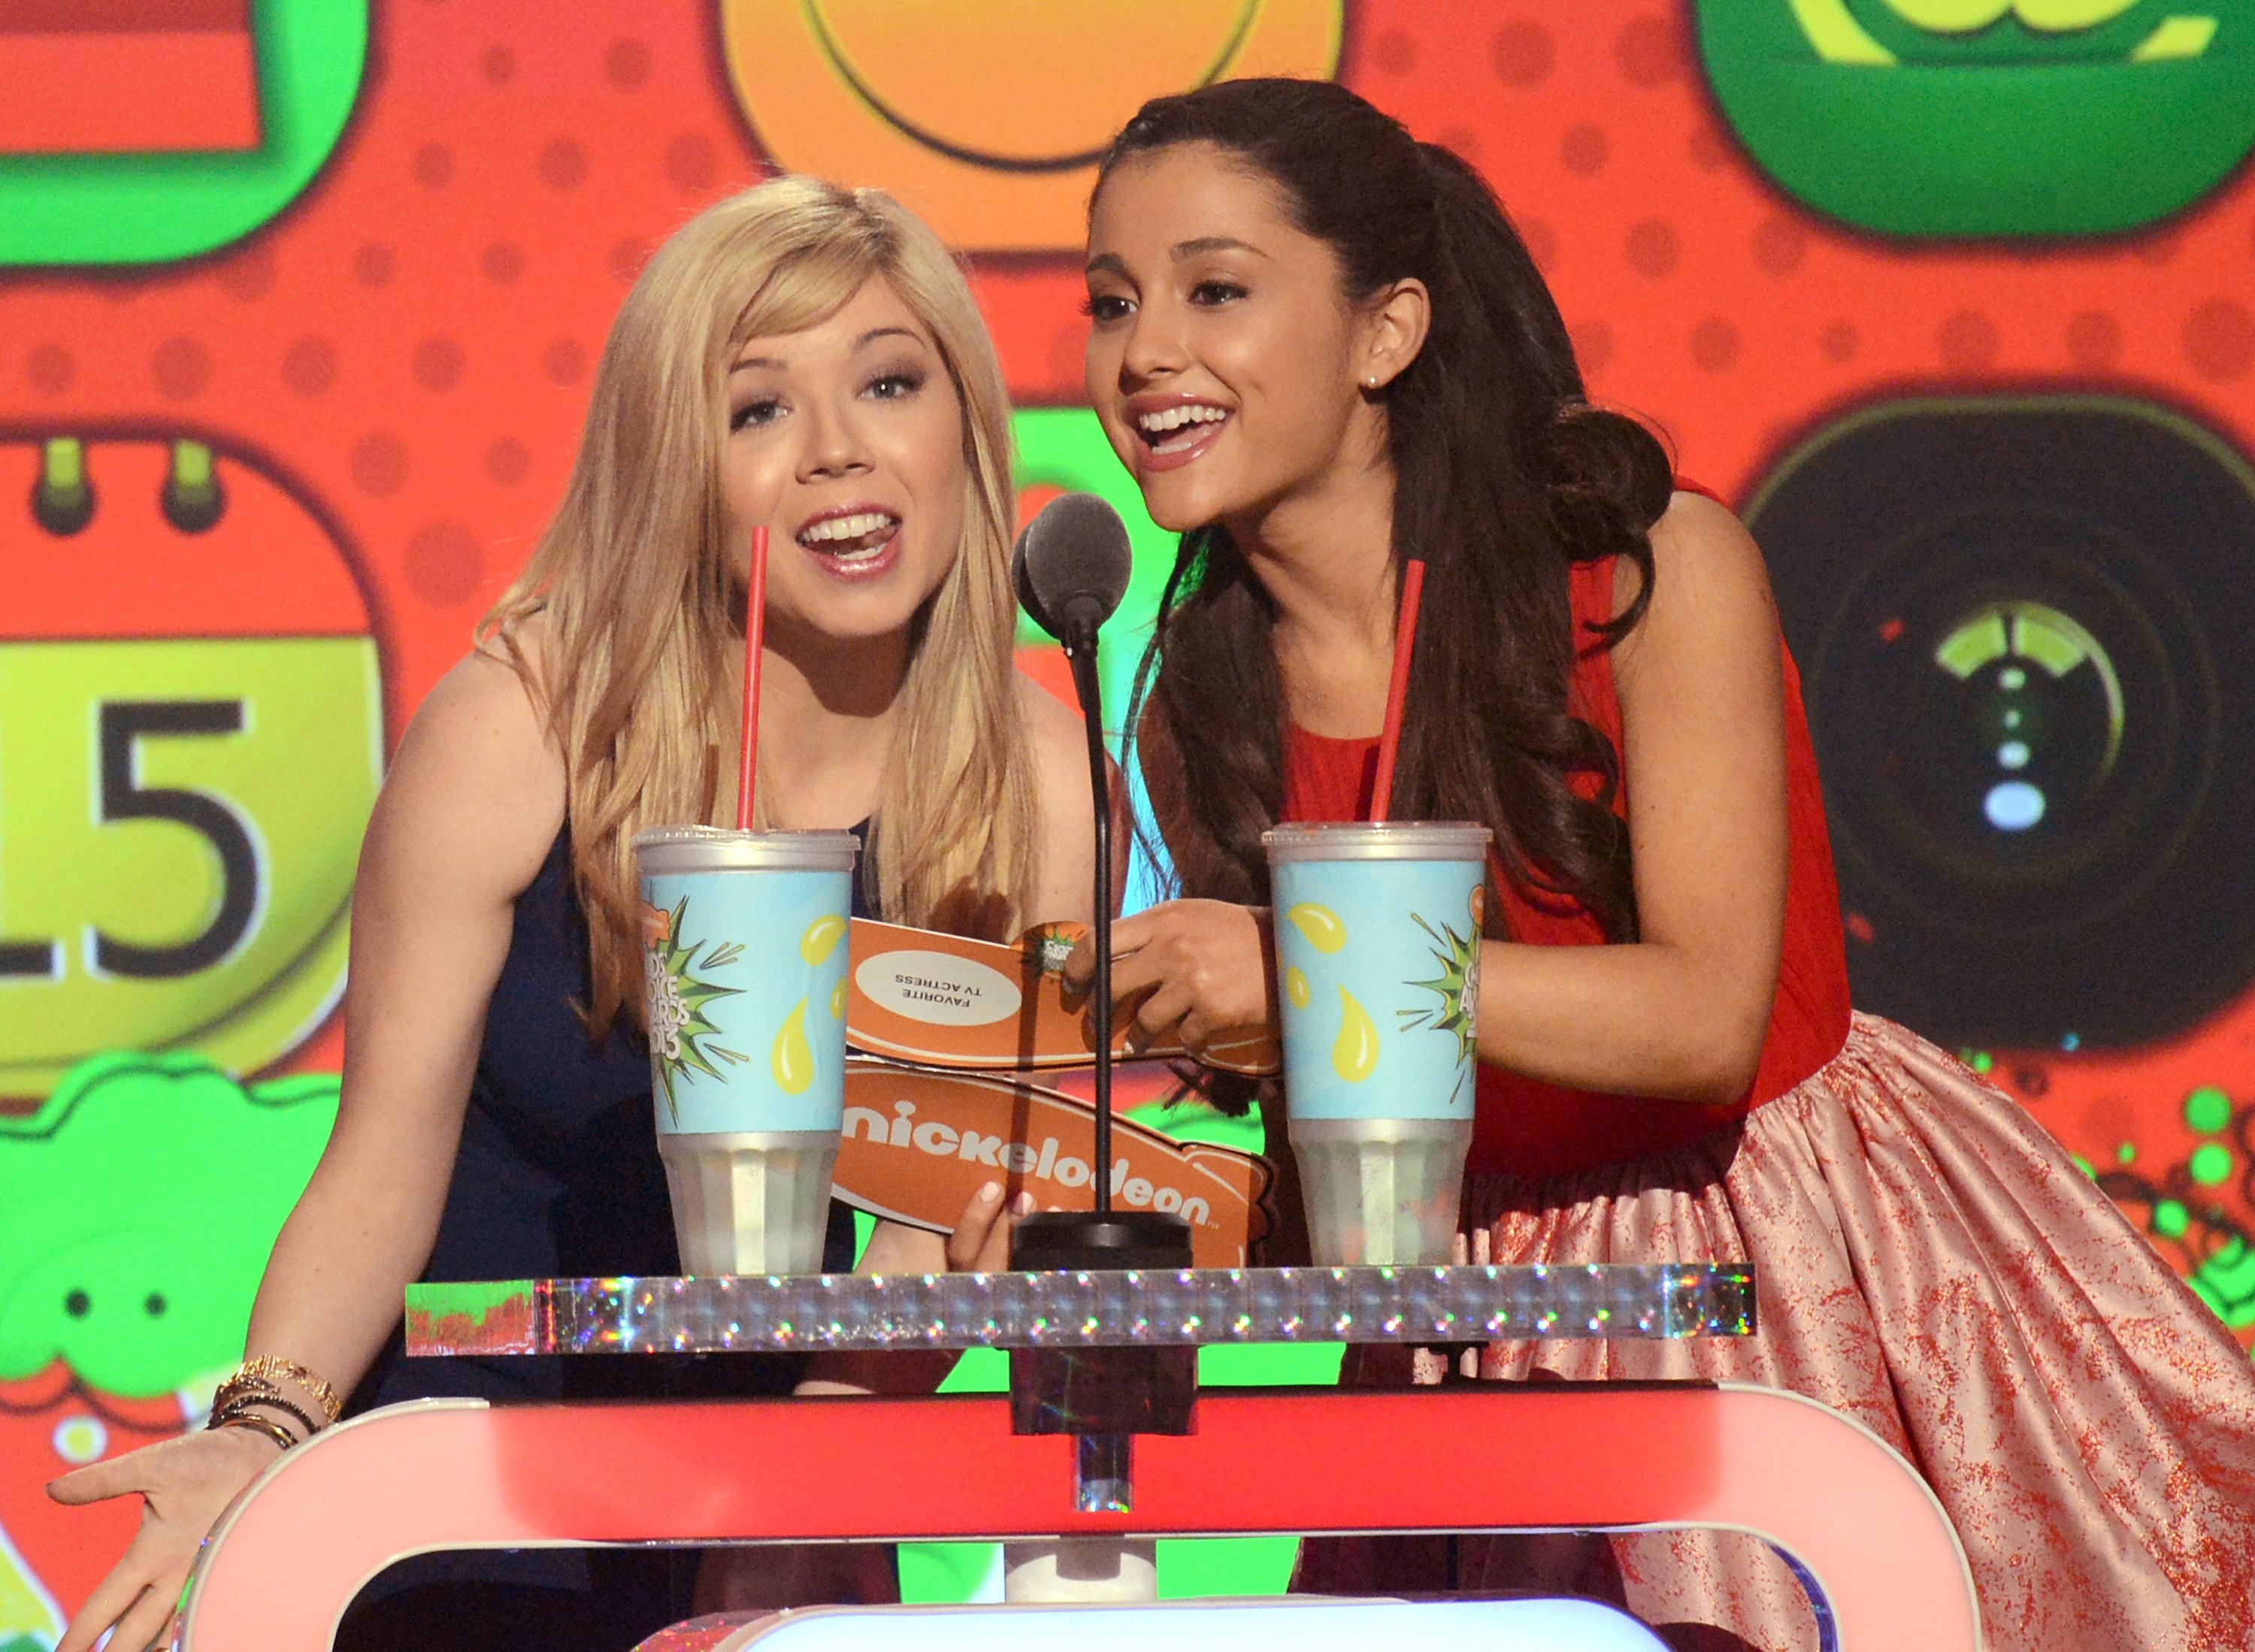 Nickelodeon actors Jennette McCurdy and Ariana Grande on stage at the Kids' Choice Awards